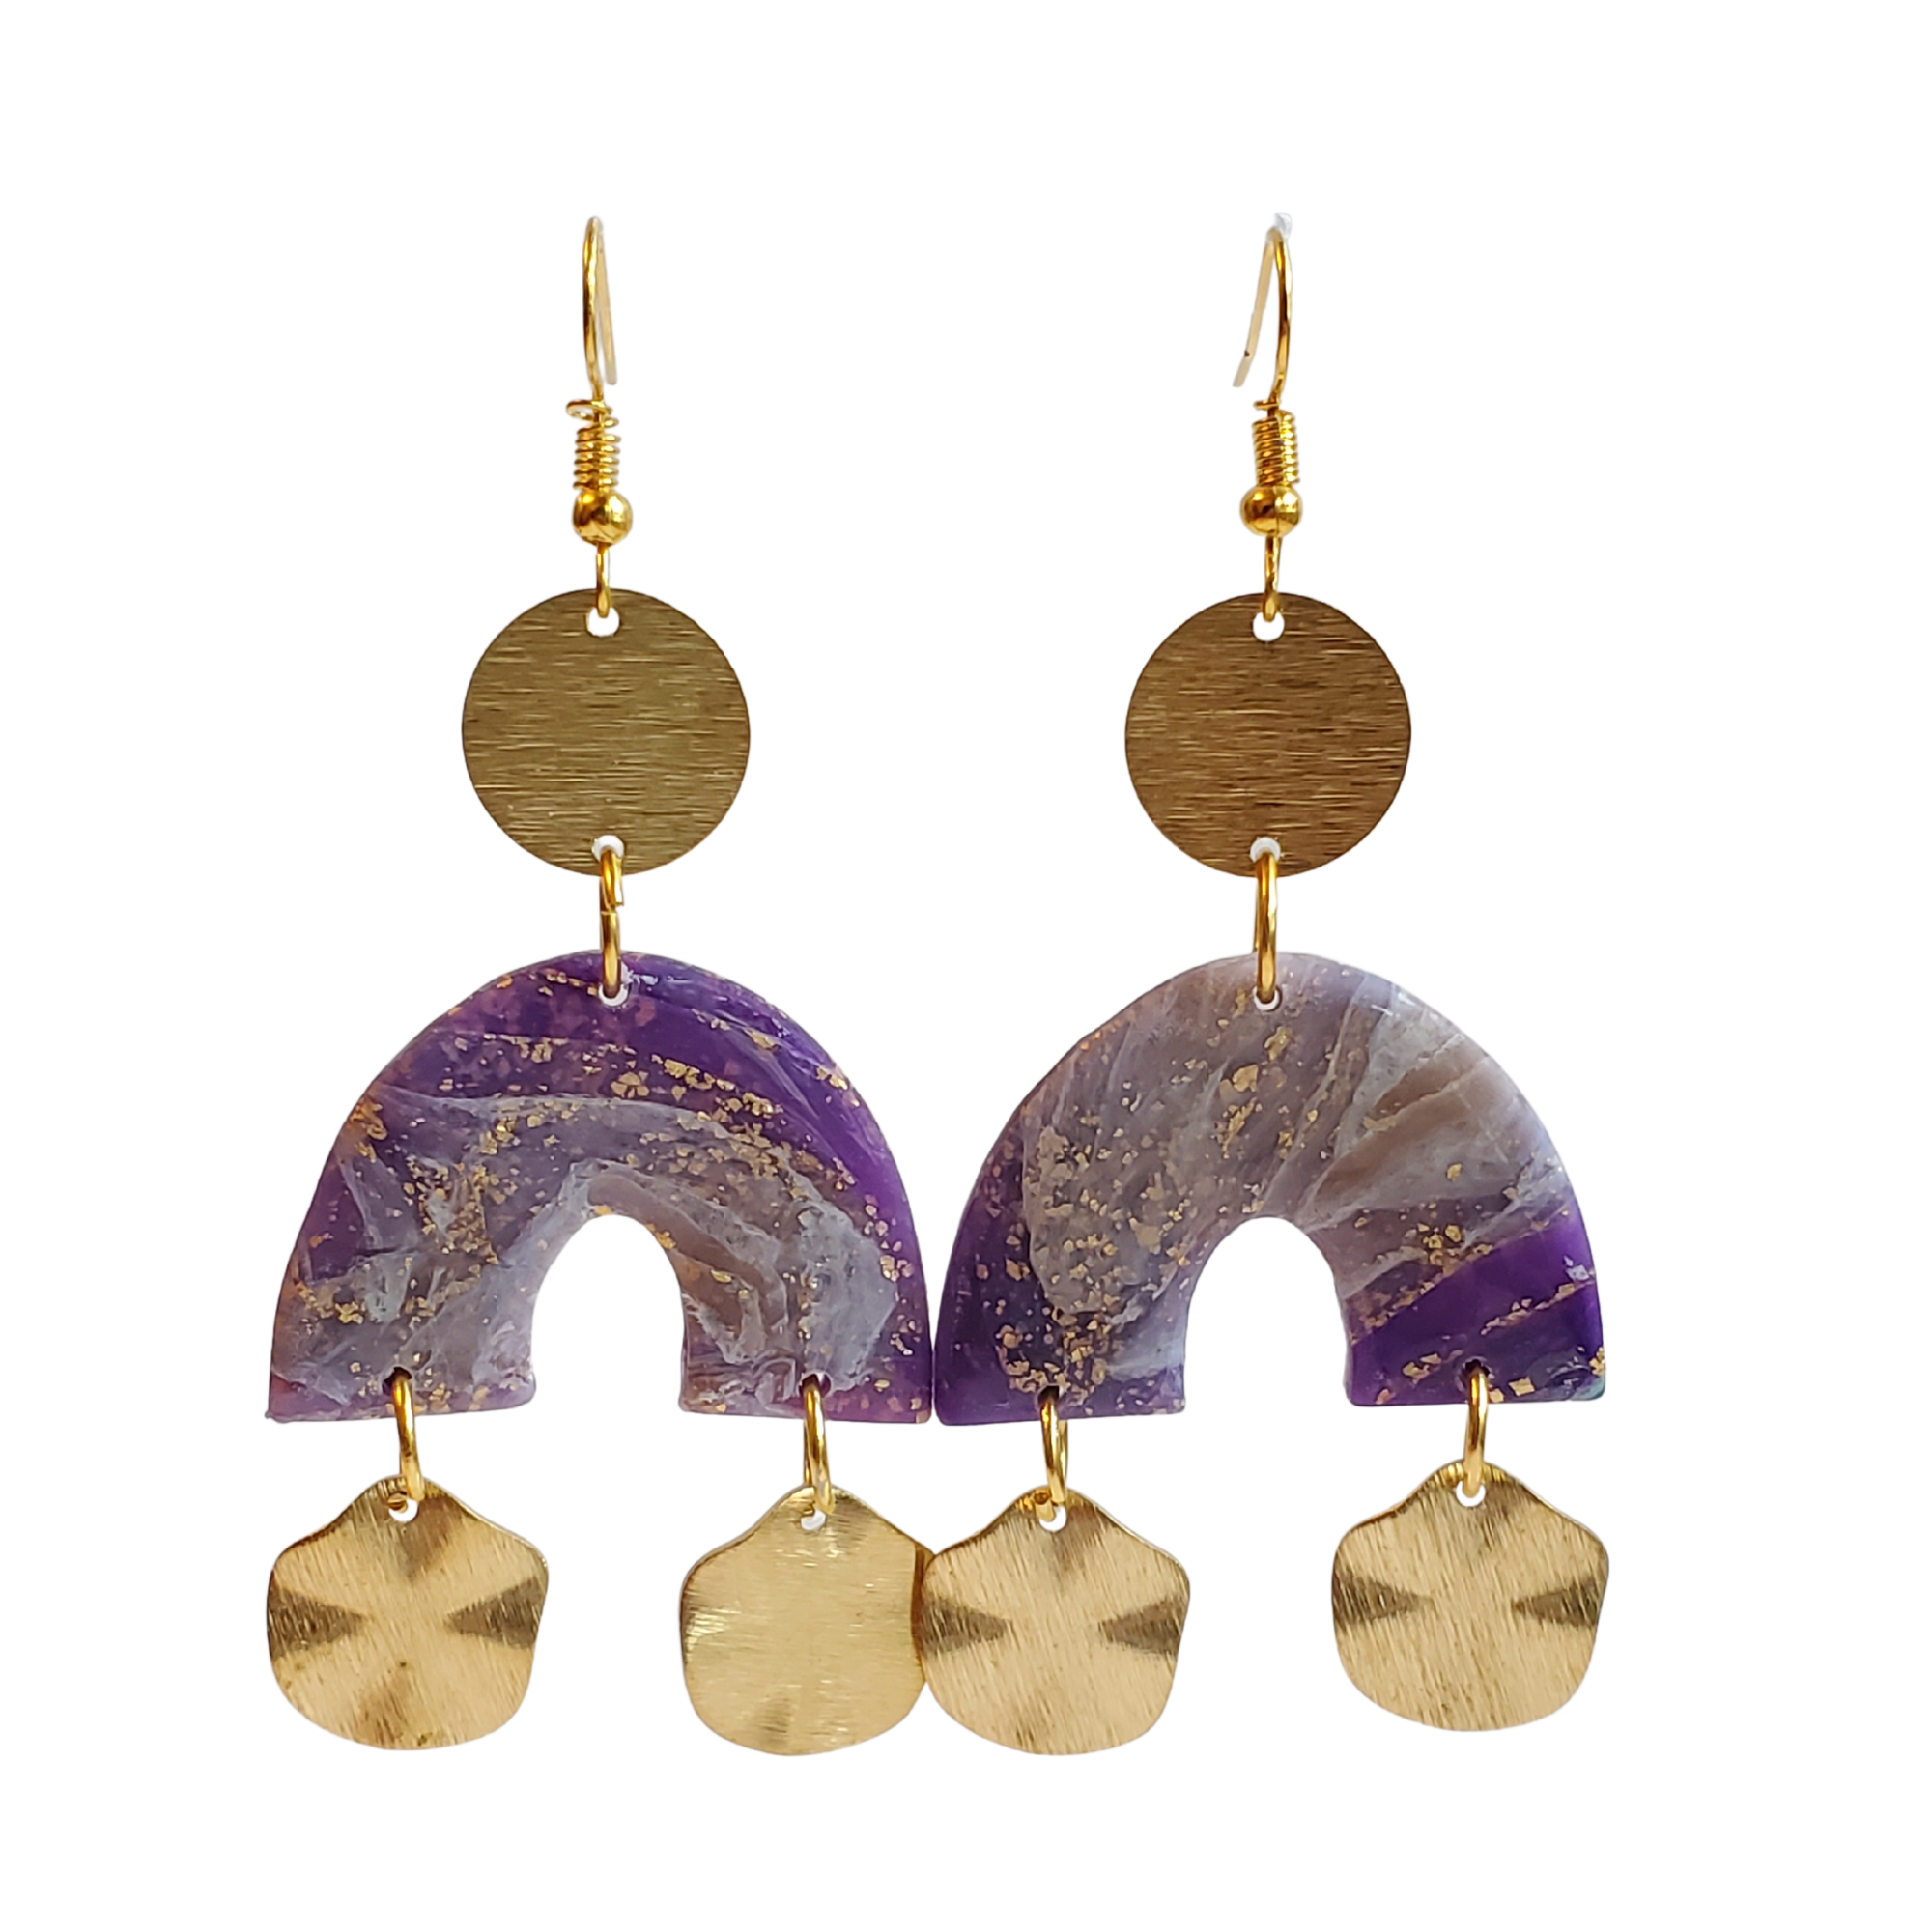 Agate Inspired Statement Earrings - Violet Arches (3 styles)